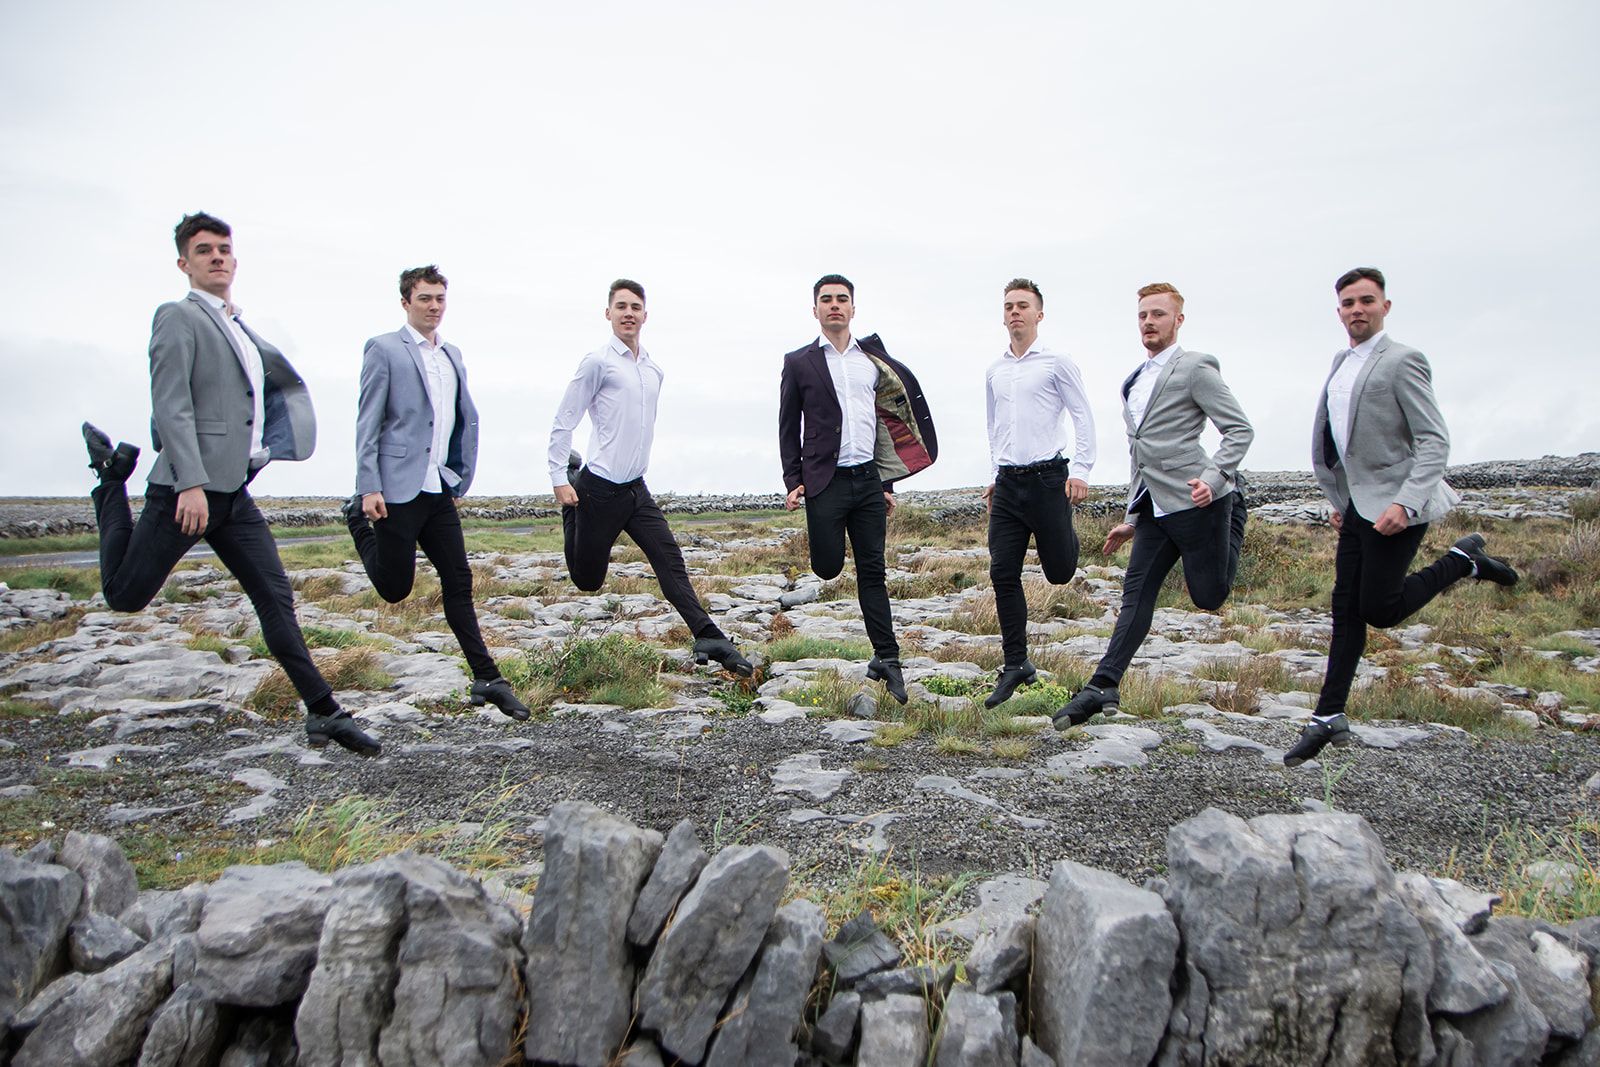 Cairde during a photoshoot earlier this year. Cairde Dance Group